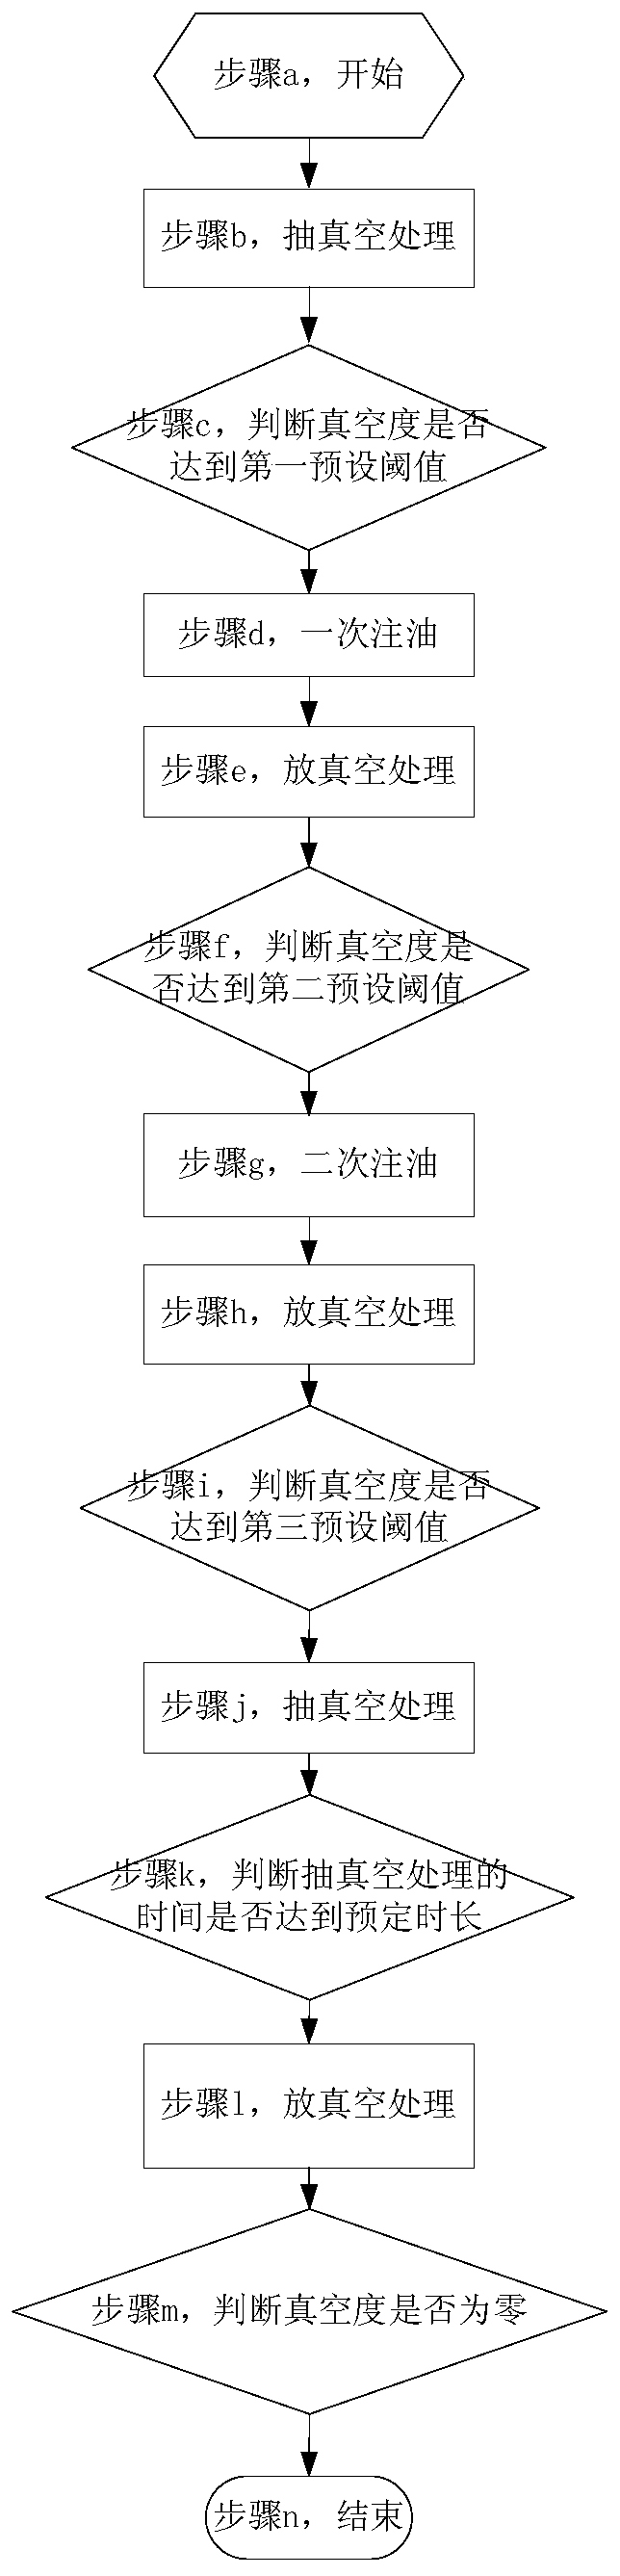 Oil injection control method, oil injection machine, processor and storage medium